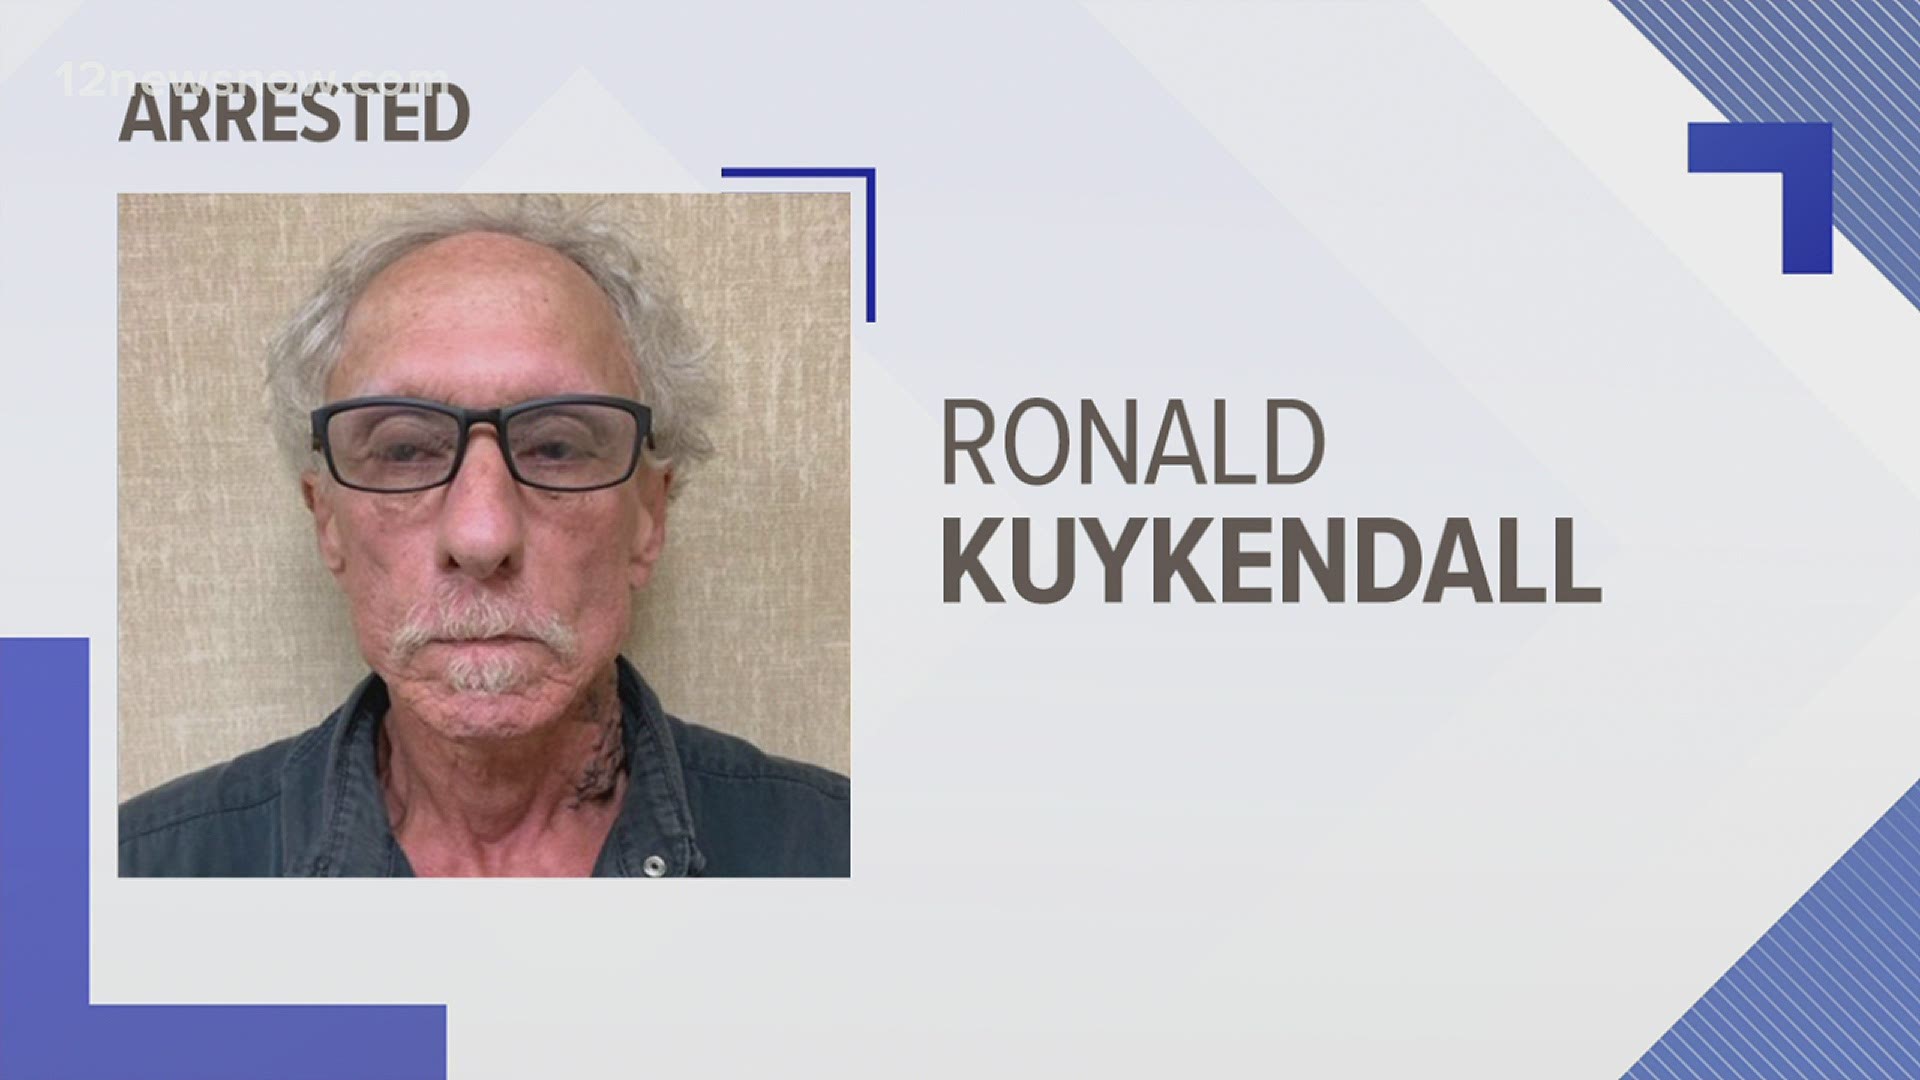 Beaumont Police received a call about a man at the soccer fields with a dog and seven puppies. Witnesses said Ronald Kuykendall talked to several kids.